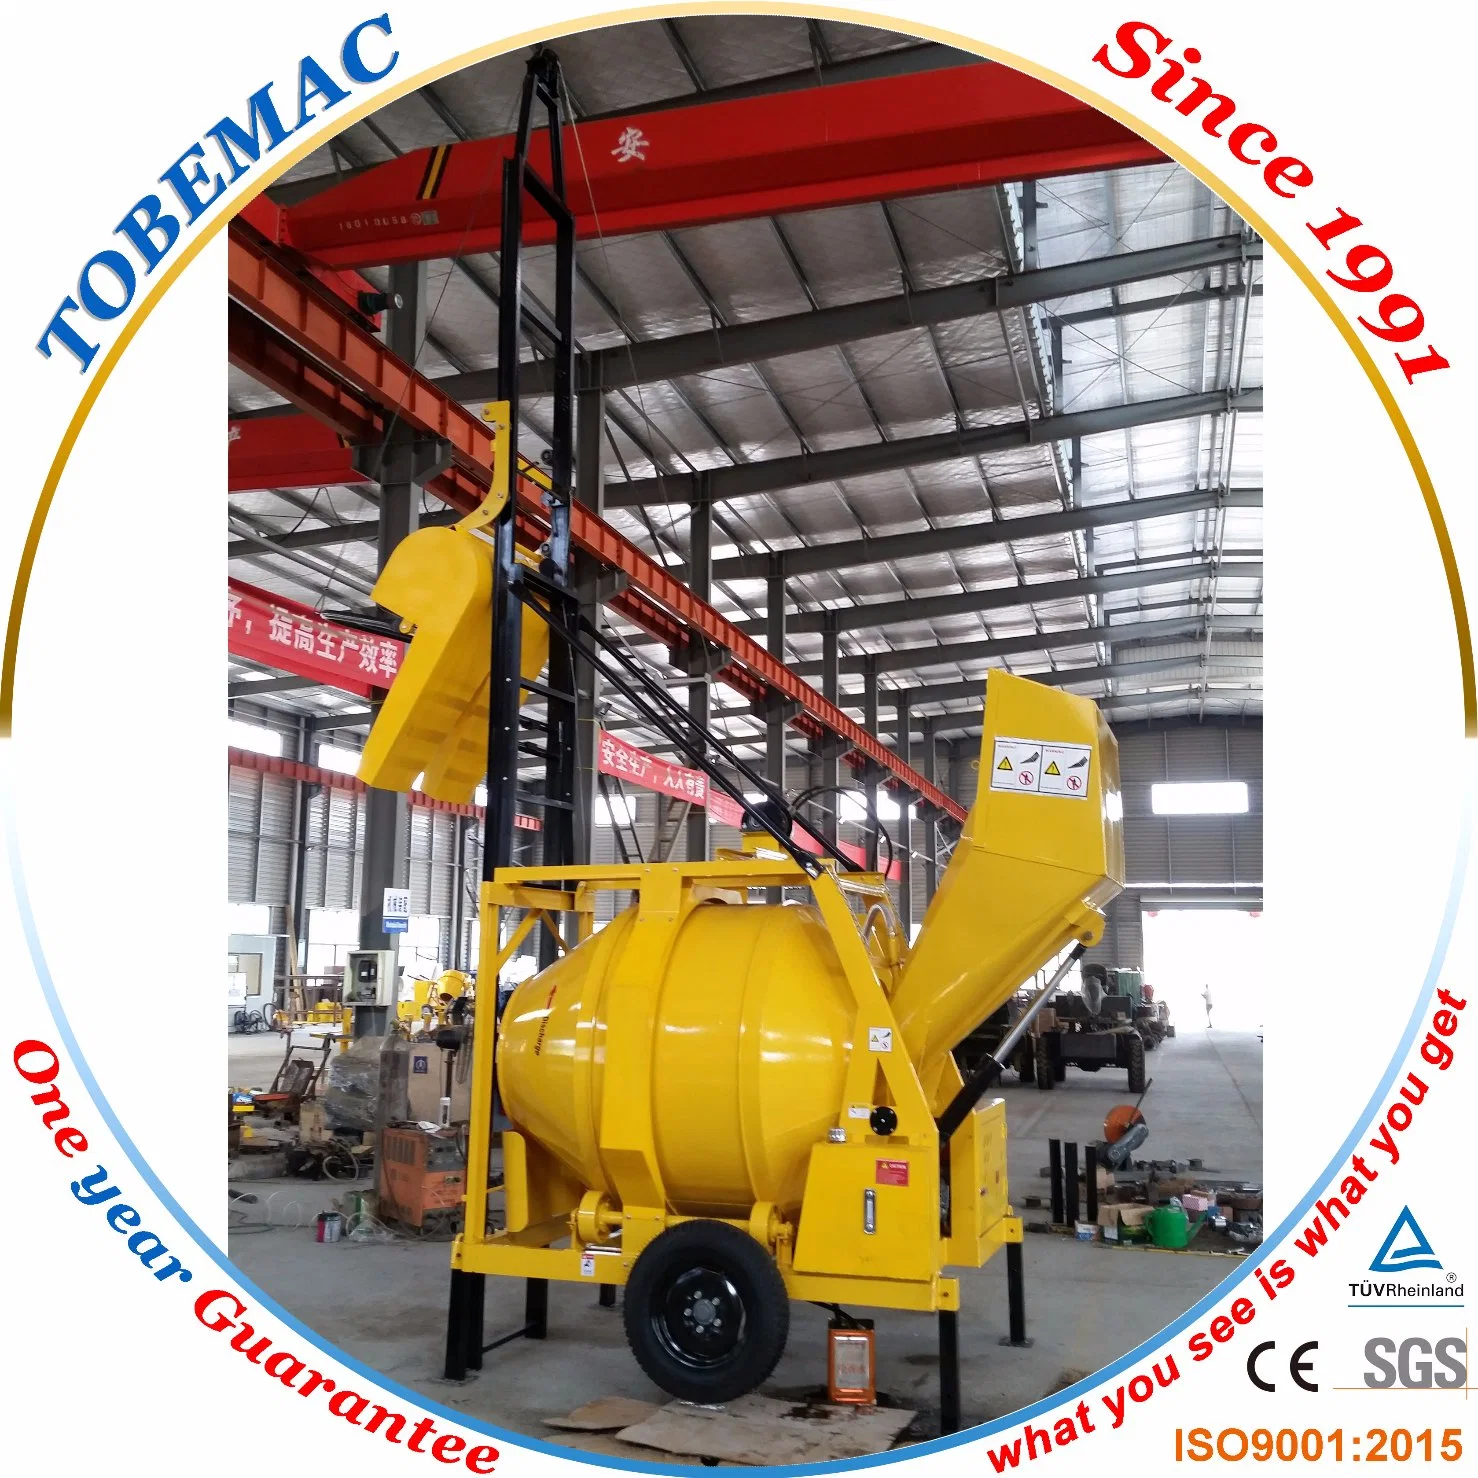 Jzc350-DHL Concrete Mixer Lift Water-Cooled Diesel Engine 16HP Mixing Power ISO9001: 2015 10-14m3/H Productivity